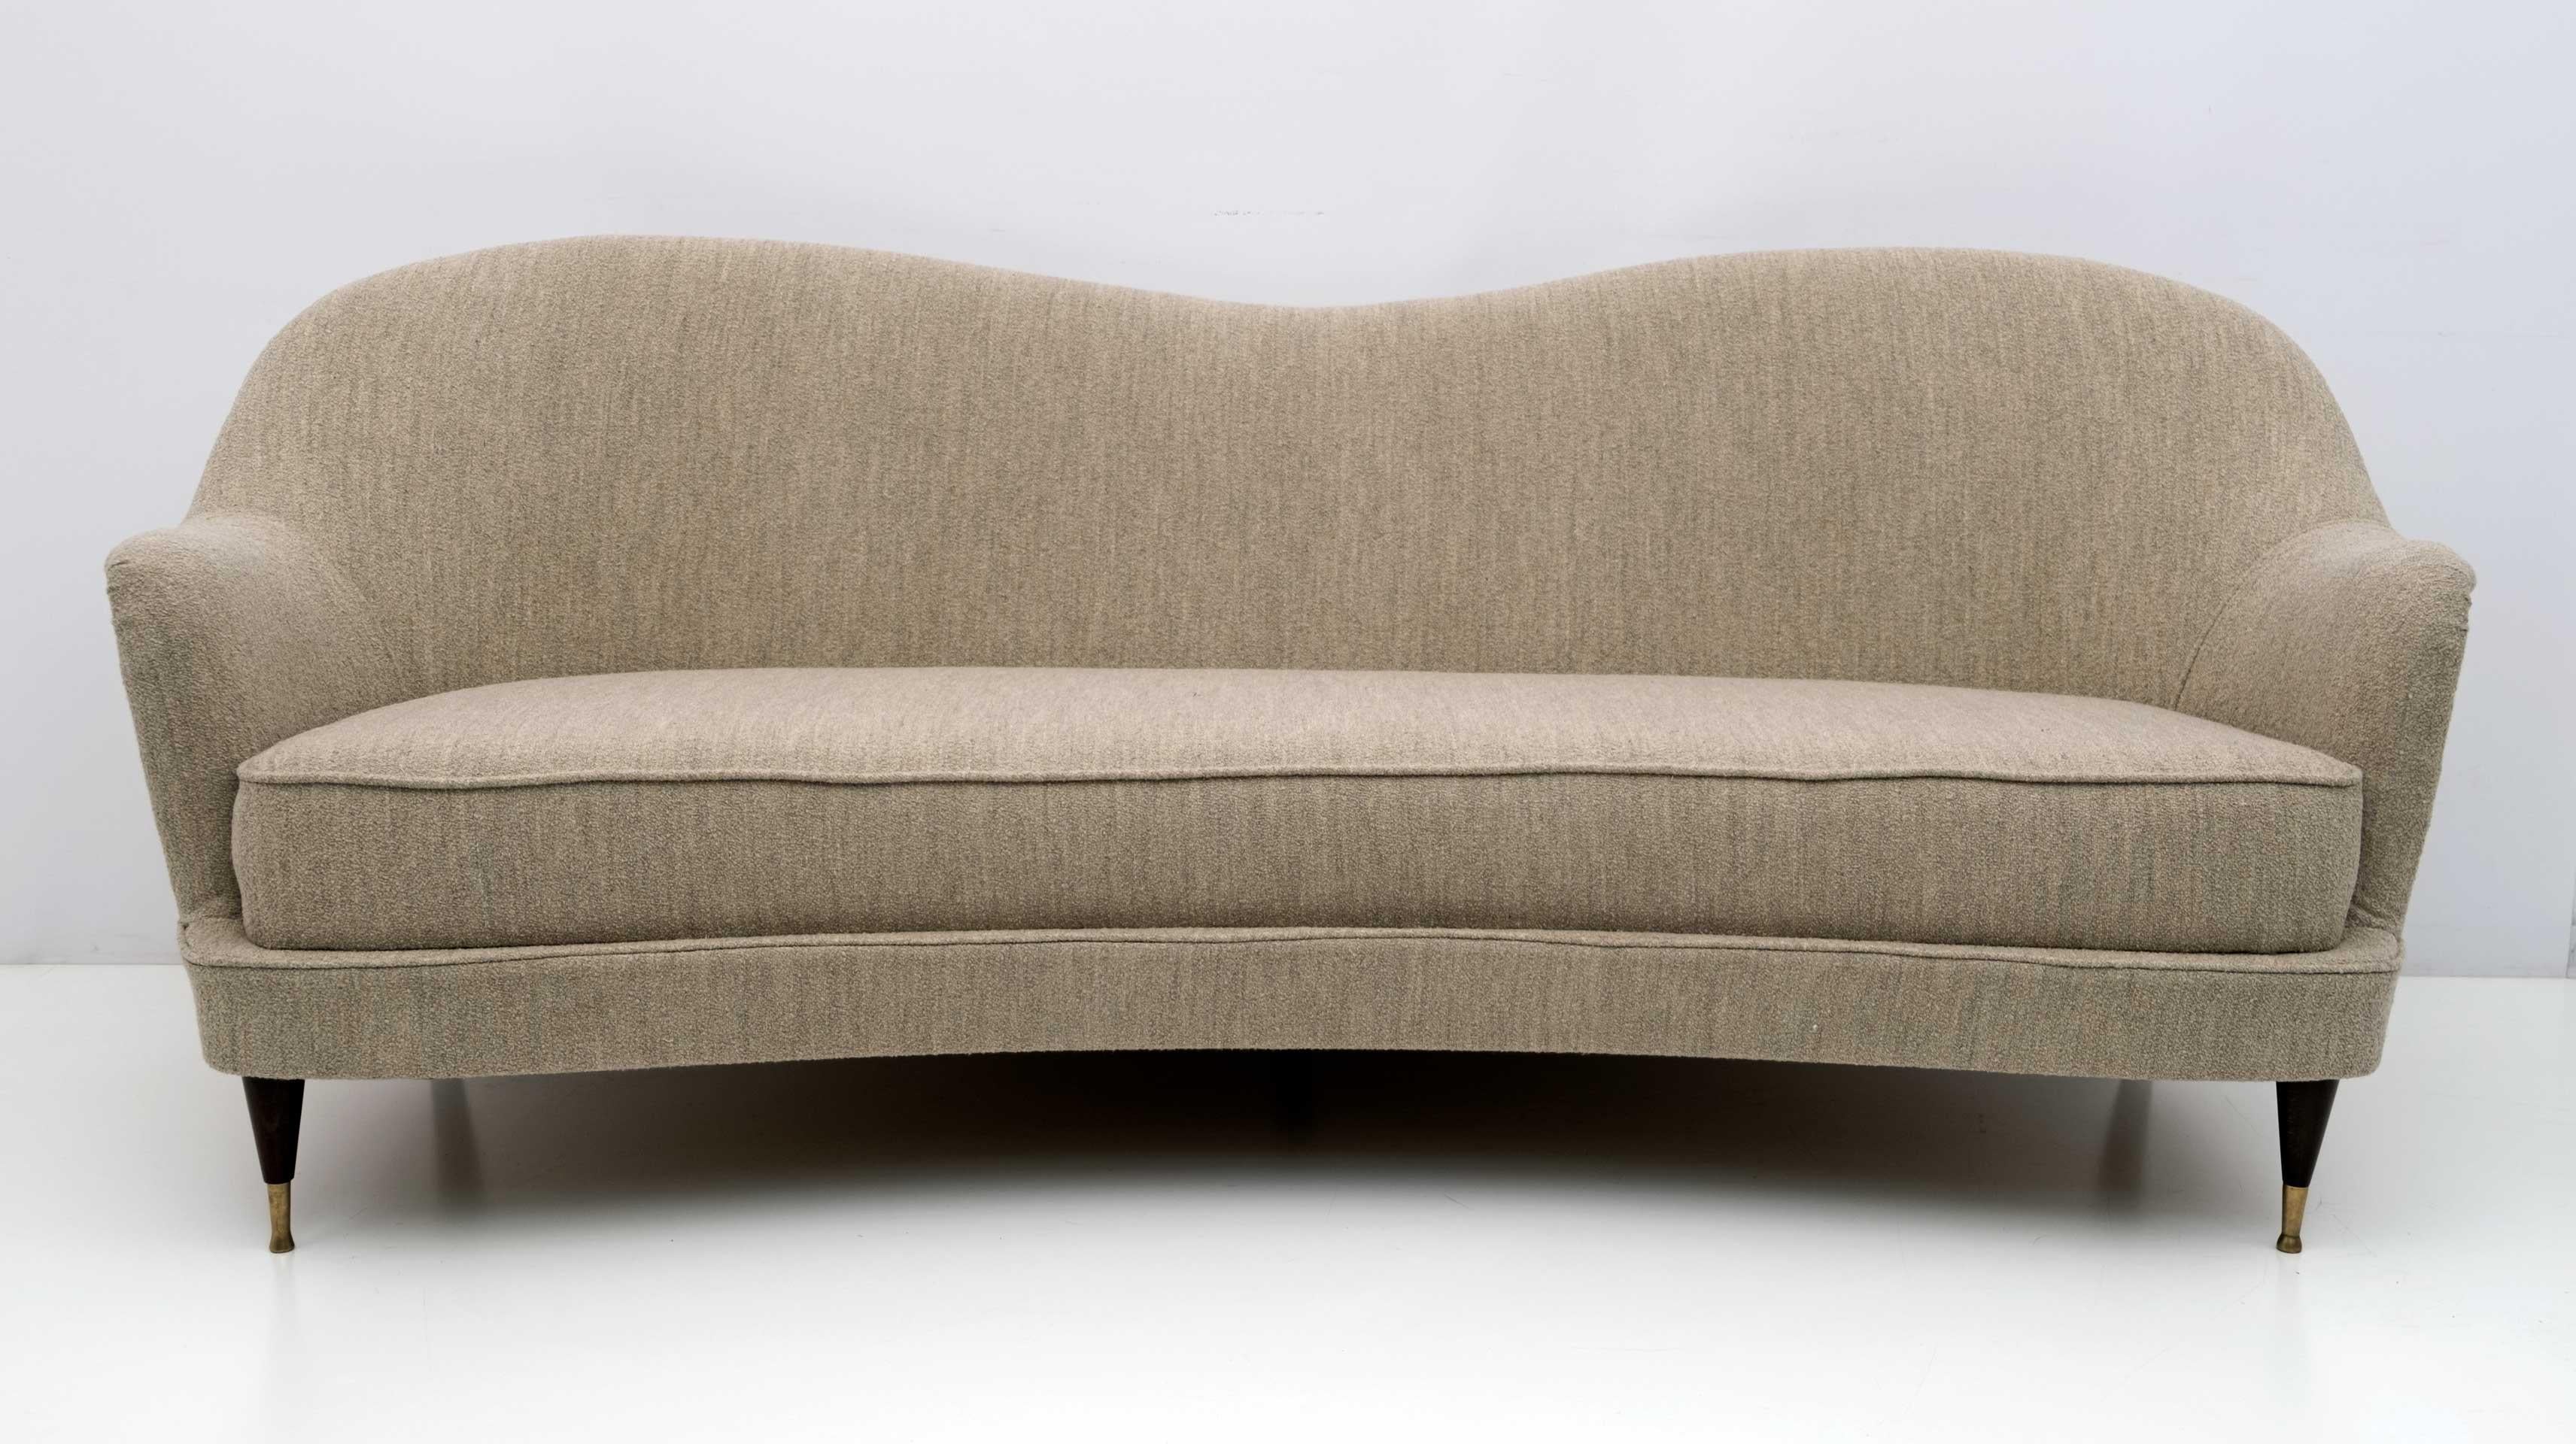 Sofa Collection designed in the style of Gio Ponti for the manufacturing company Isa Bergamo in the late 1950s.
The armchairs have been restored and the upholstery has been redone in hemp-colored Boucle fabric.
Two armchairs are also available.